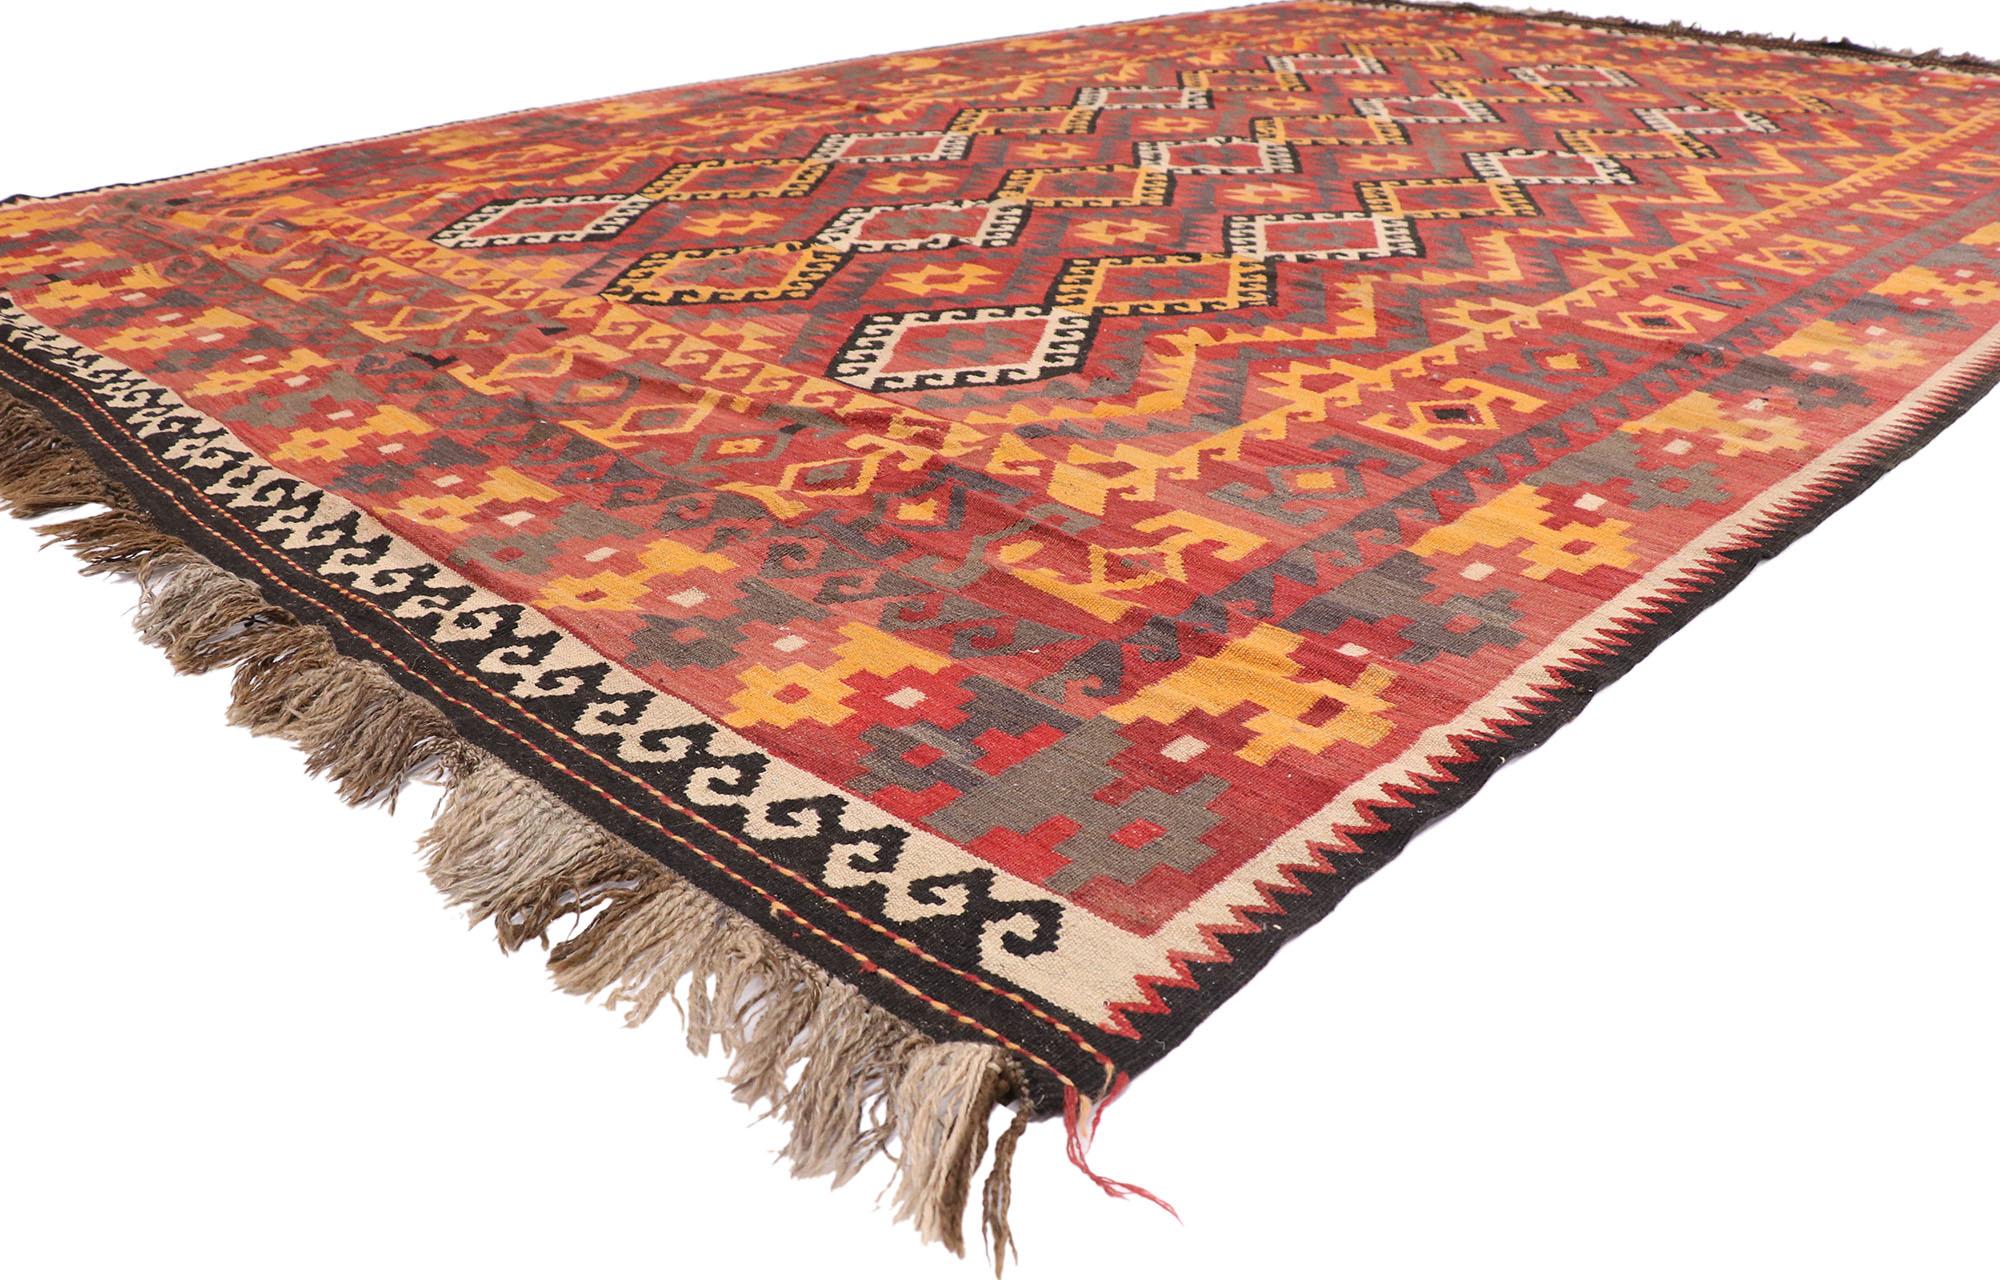 78008 Vintage Afghan Maimana Kilim Rug, 08'07 x 13'07. Experience the essence of Southwest style and contemporary Santa Fe design in this hand-woven wool vintage Afghani Maimana kilim rug. Bursting with intricate details and a bold, expressive